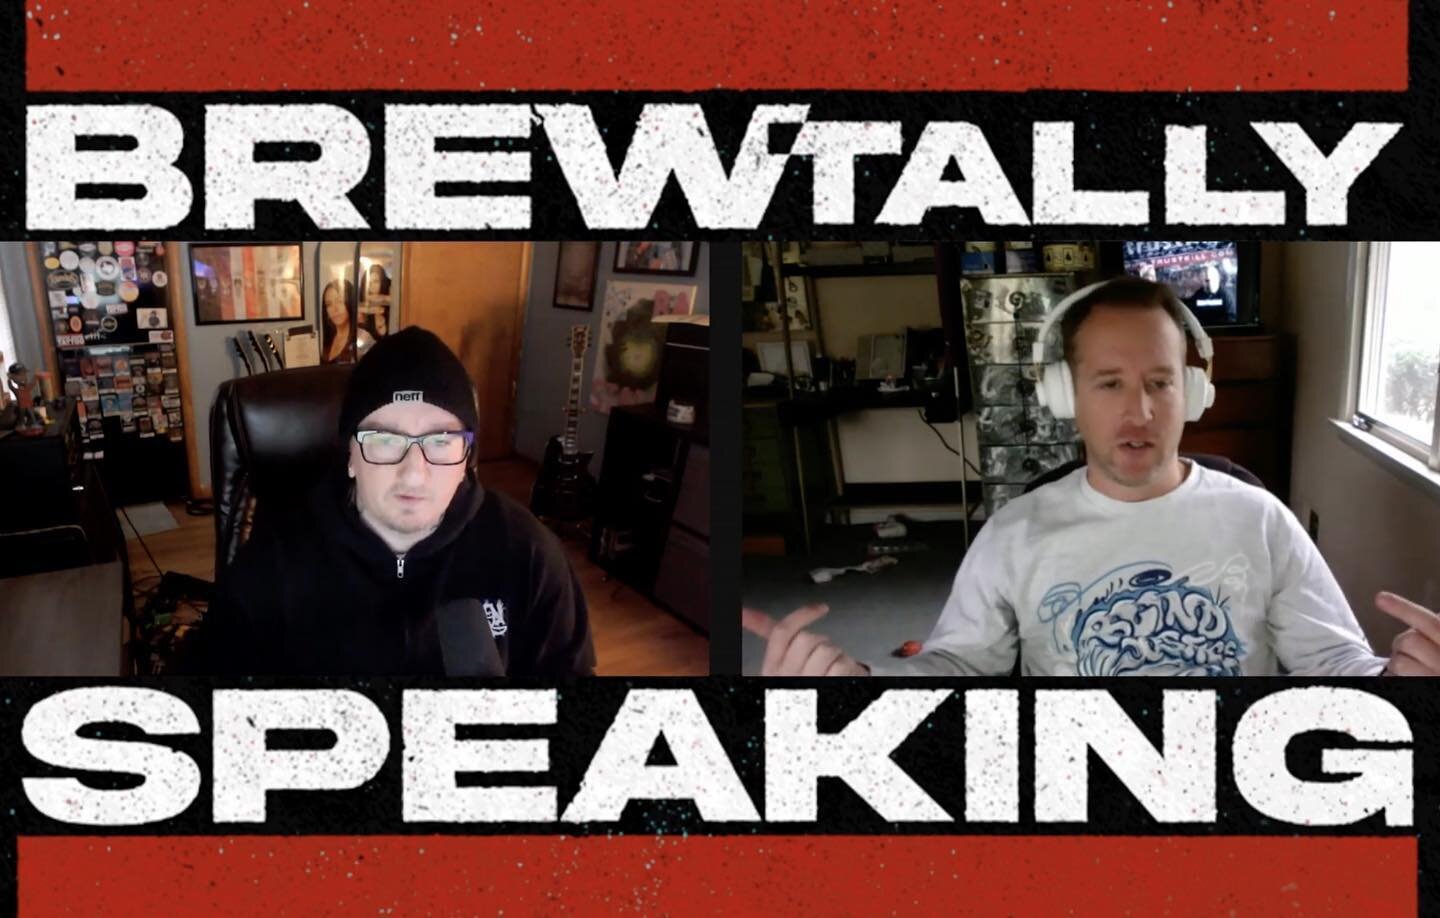 Listen or watch me talk Trustkill for a few hours at Spotify or YouTube.